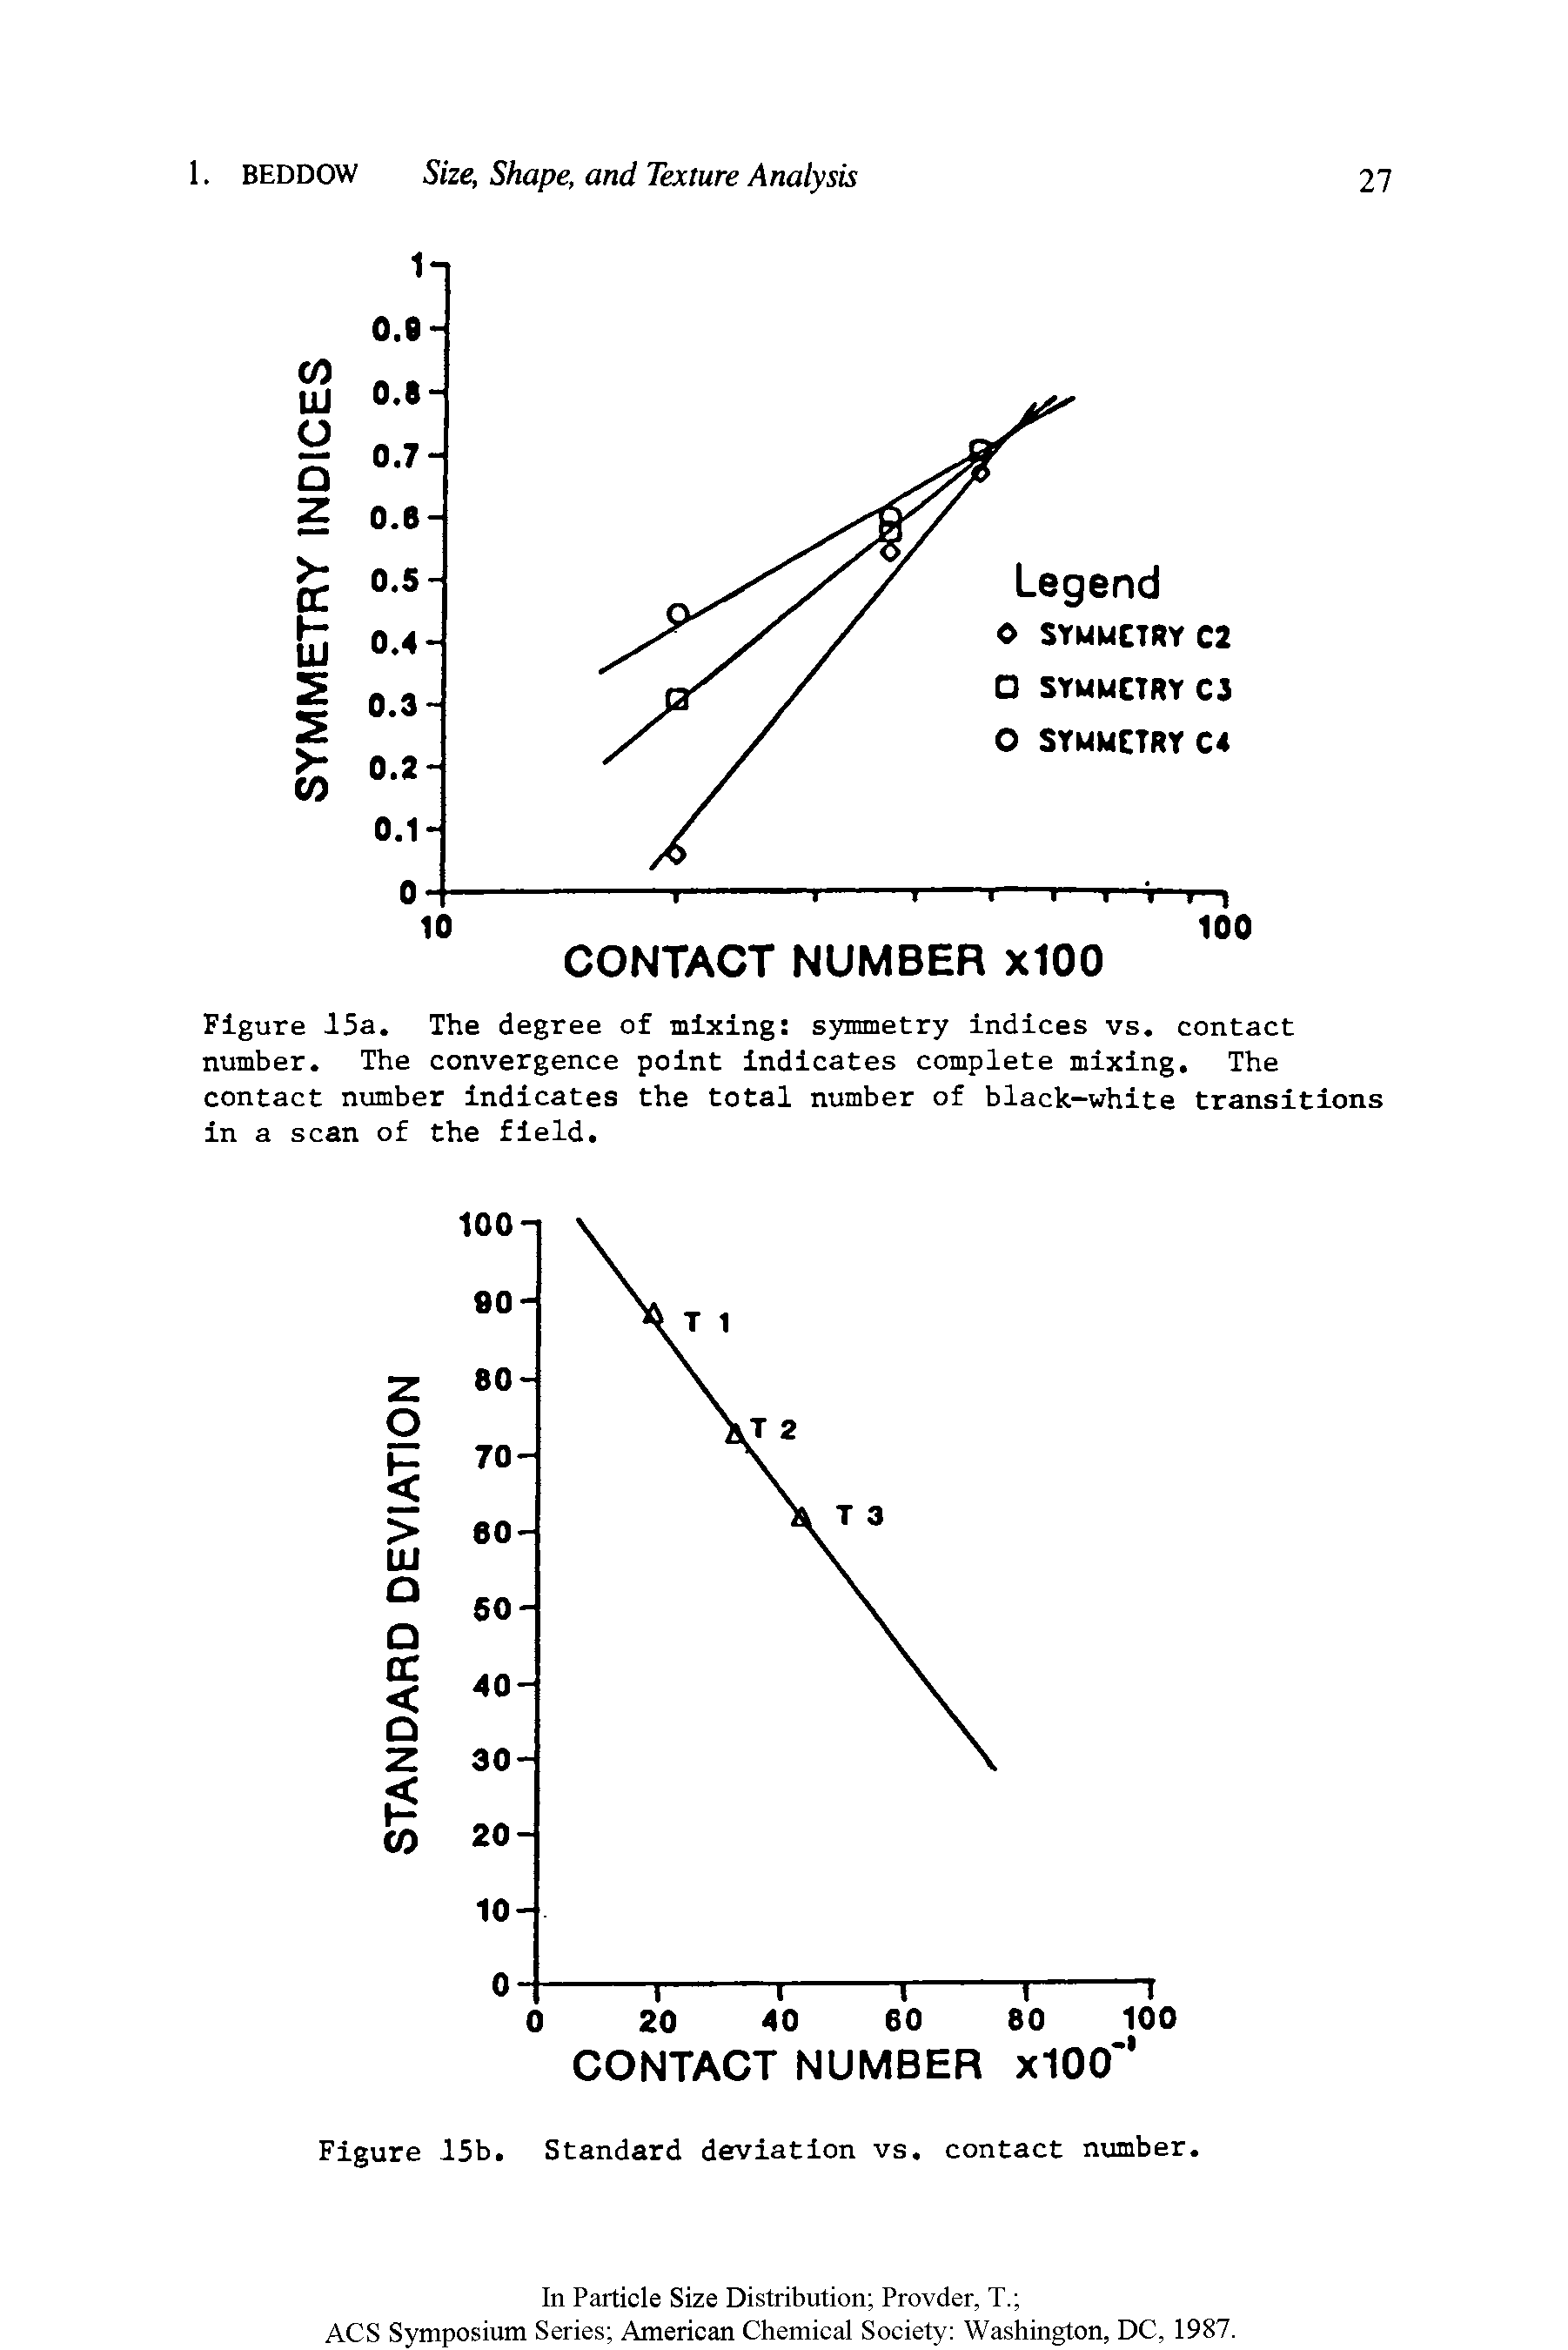 Figure 15a. The degree of mixing symmetry indices vs. contact number. The convergence point indicates complete mixing. The contact number indicates the total number of black-white transitions in a scan of the field.